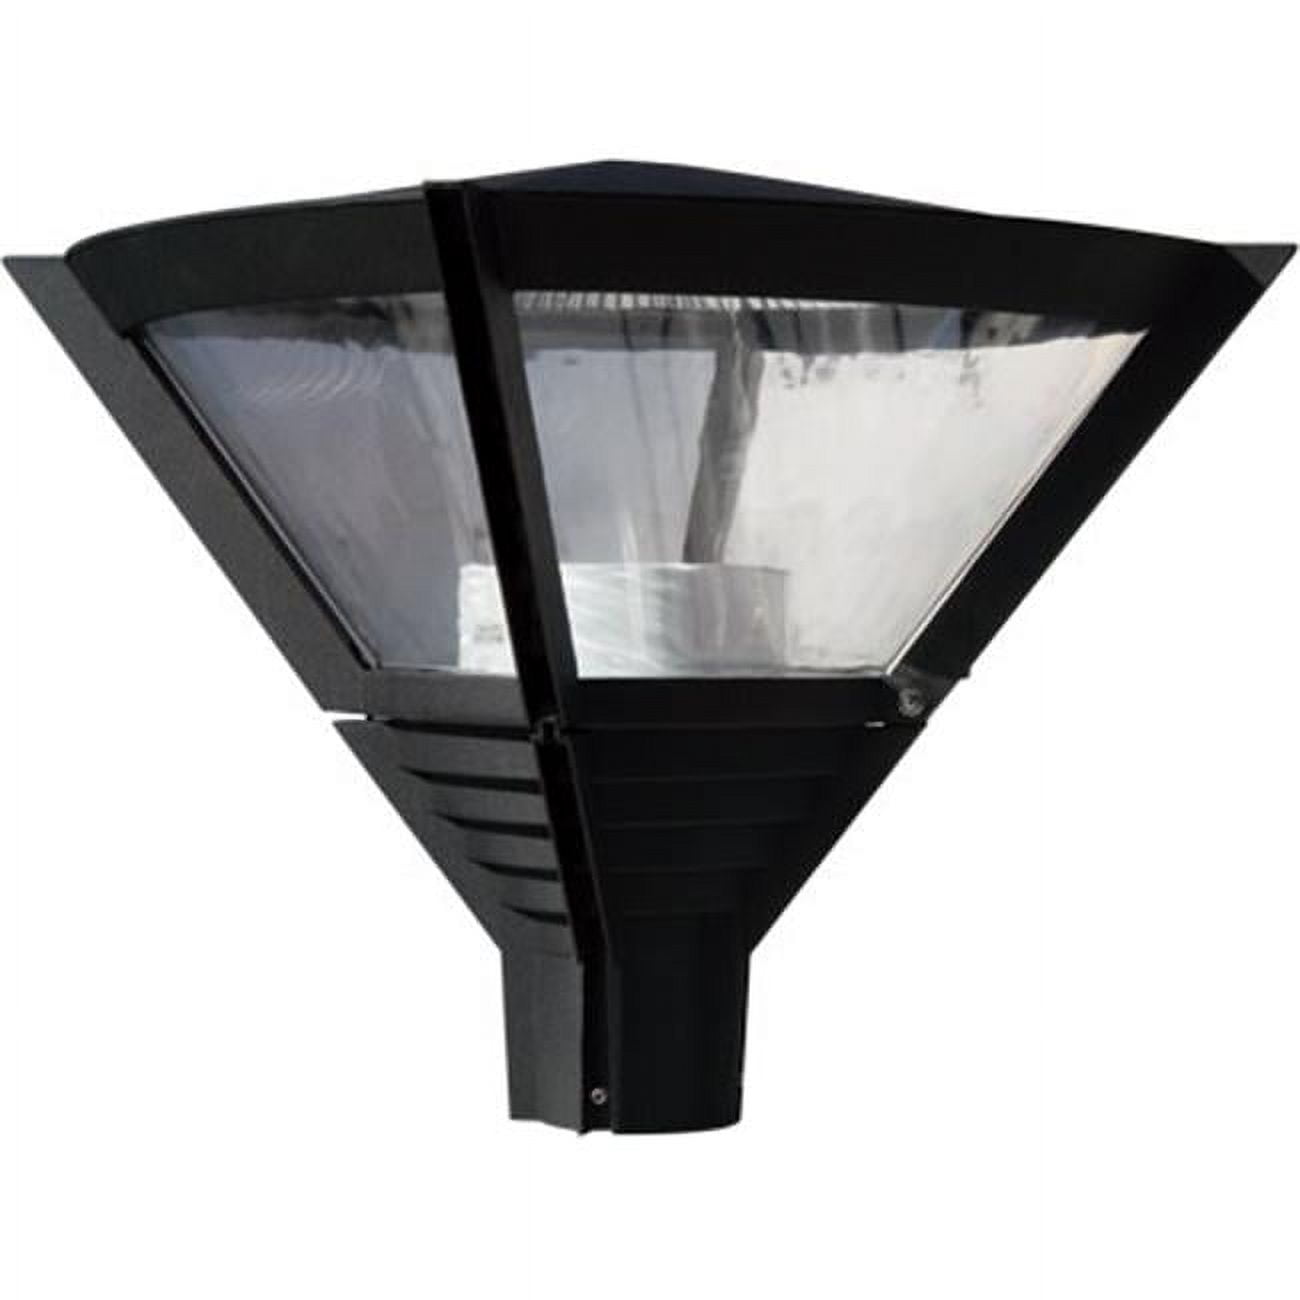 Picture of Dabmar Lighting GM561-B Powder Coated Cast Aluminum Architectural Post Top Light Fixture, Black - 20.75 x 20.75 x 20.75 in.